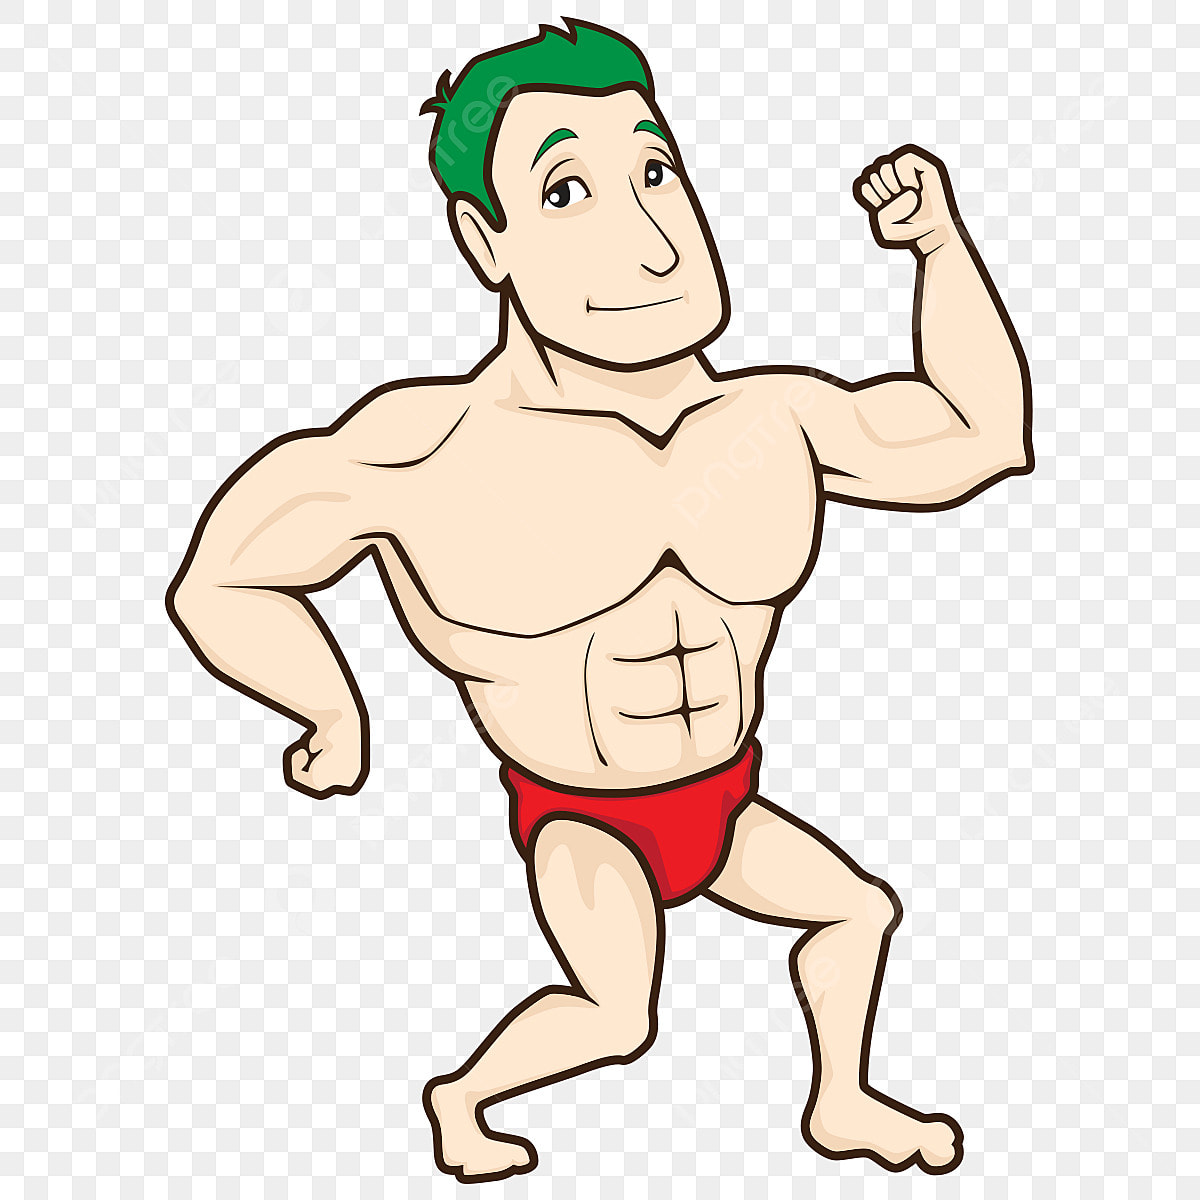 pngtree-fitness-strong-man-image-character-png-image_5327518.jpg